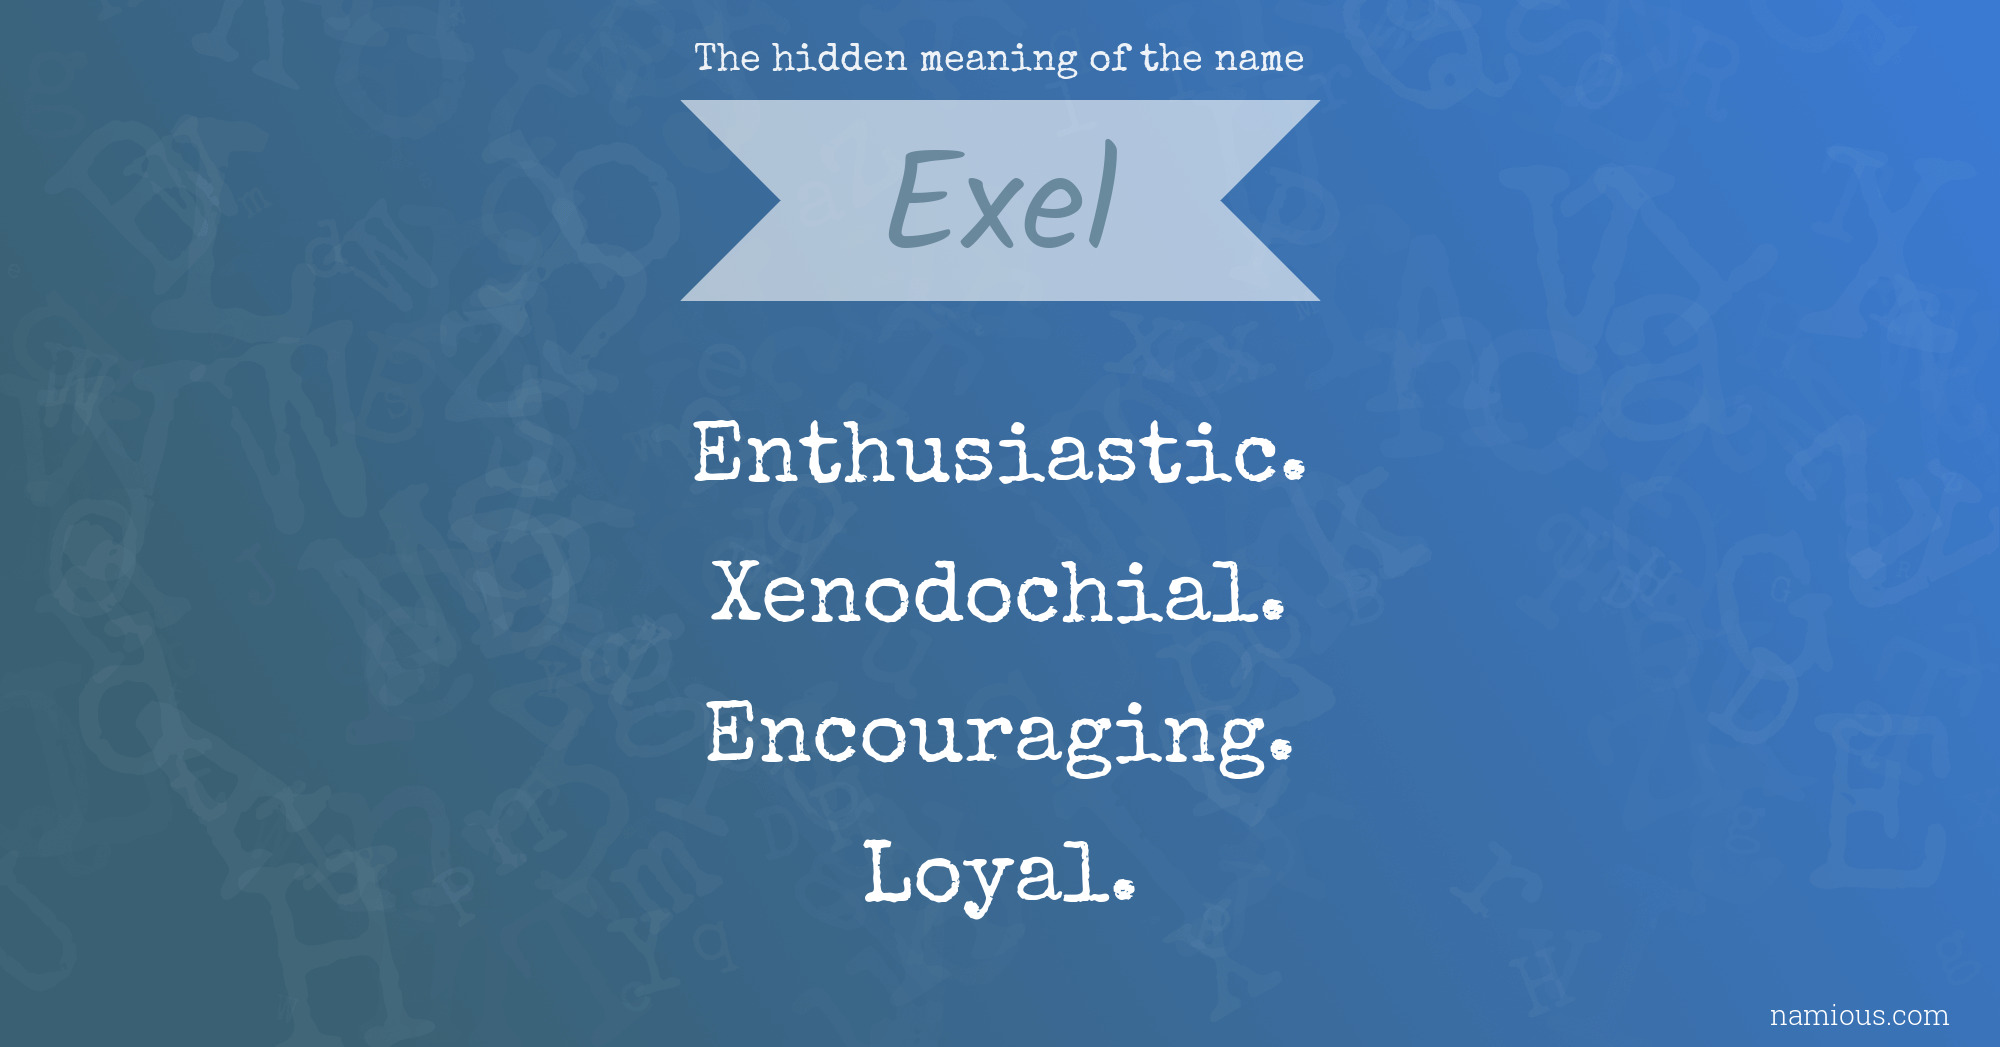 The hidden meaning of the name Exel